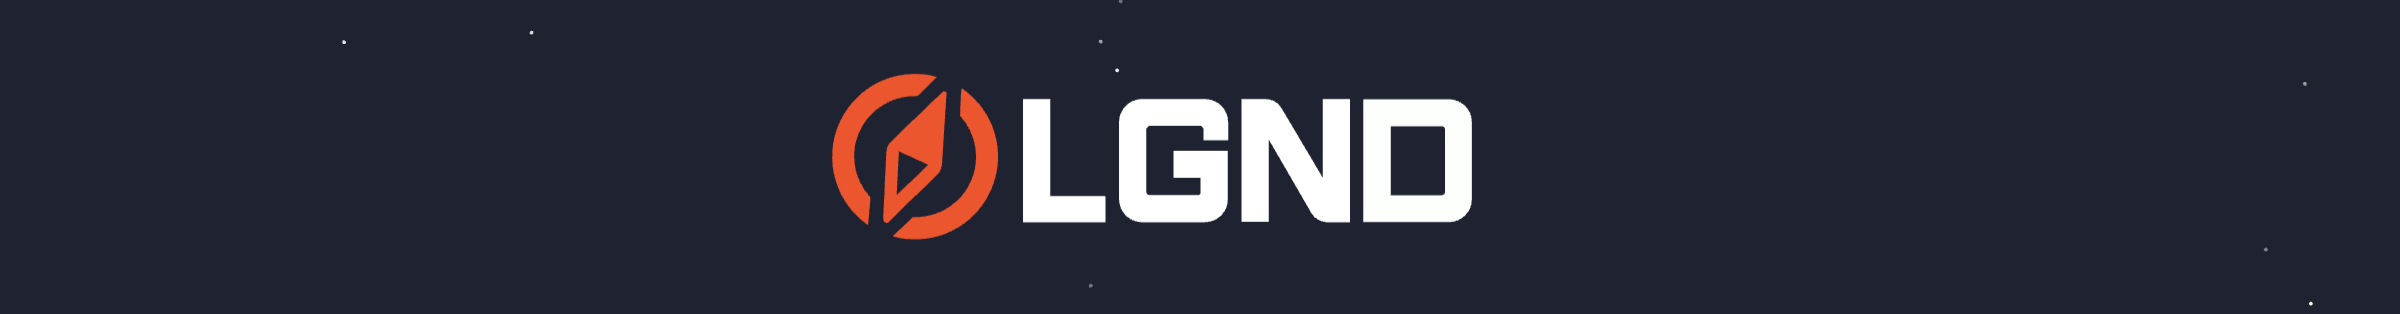 The LGND compass logo on a starry background.